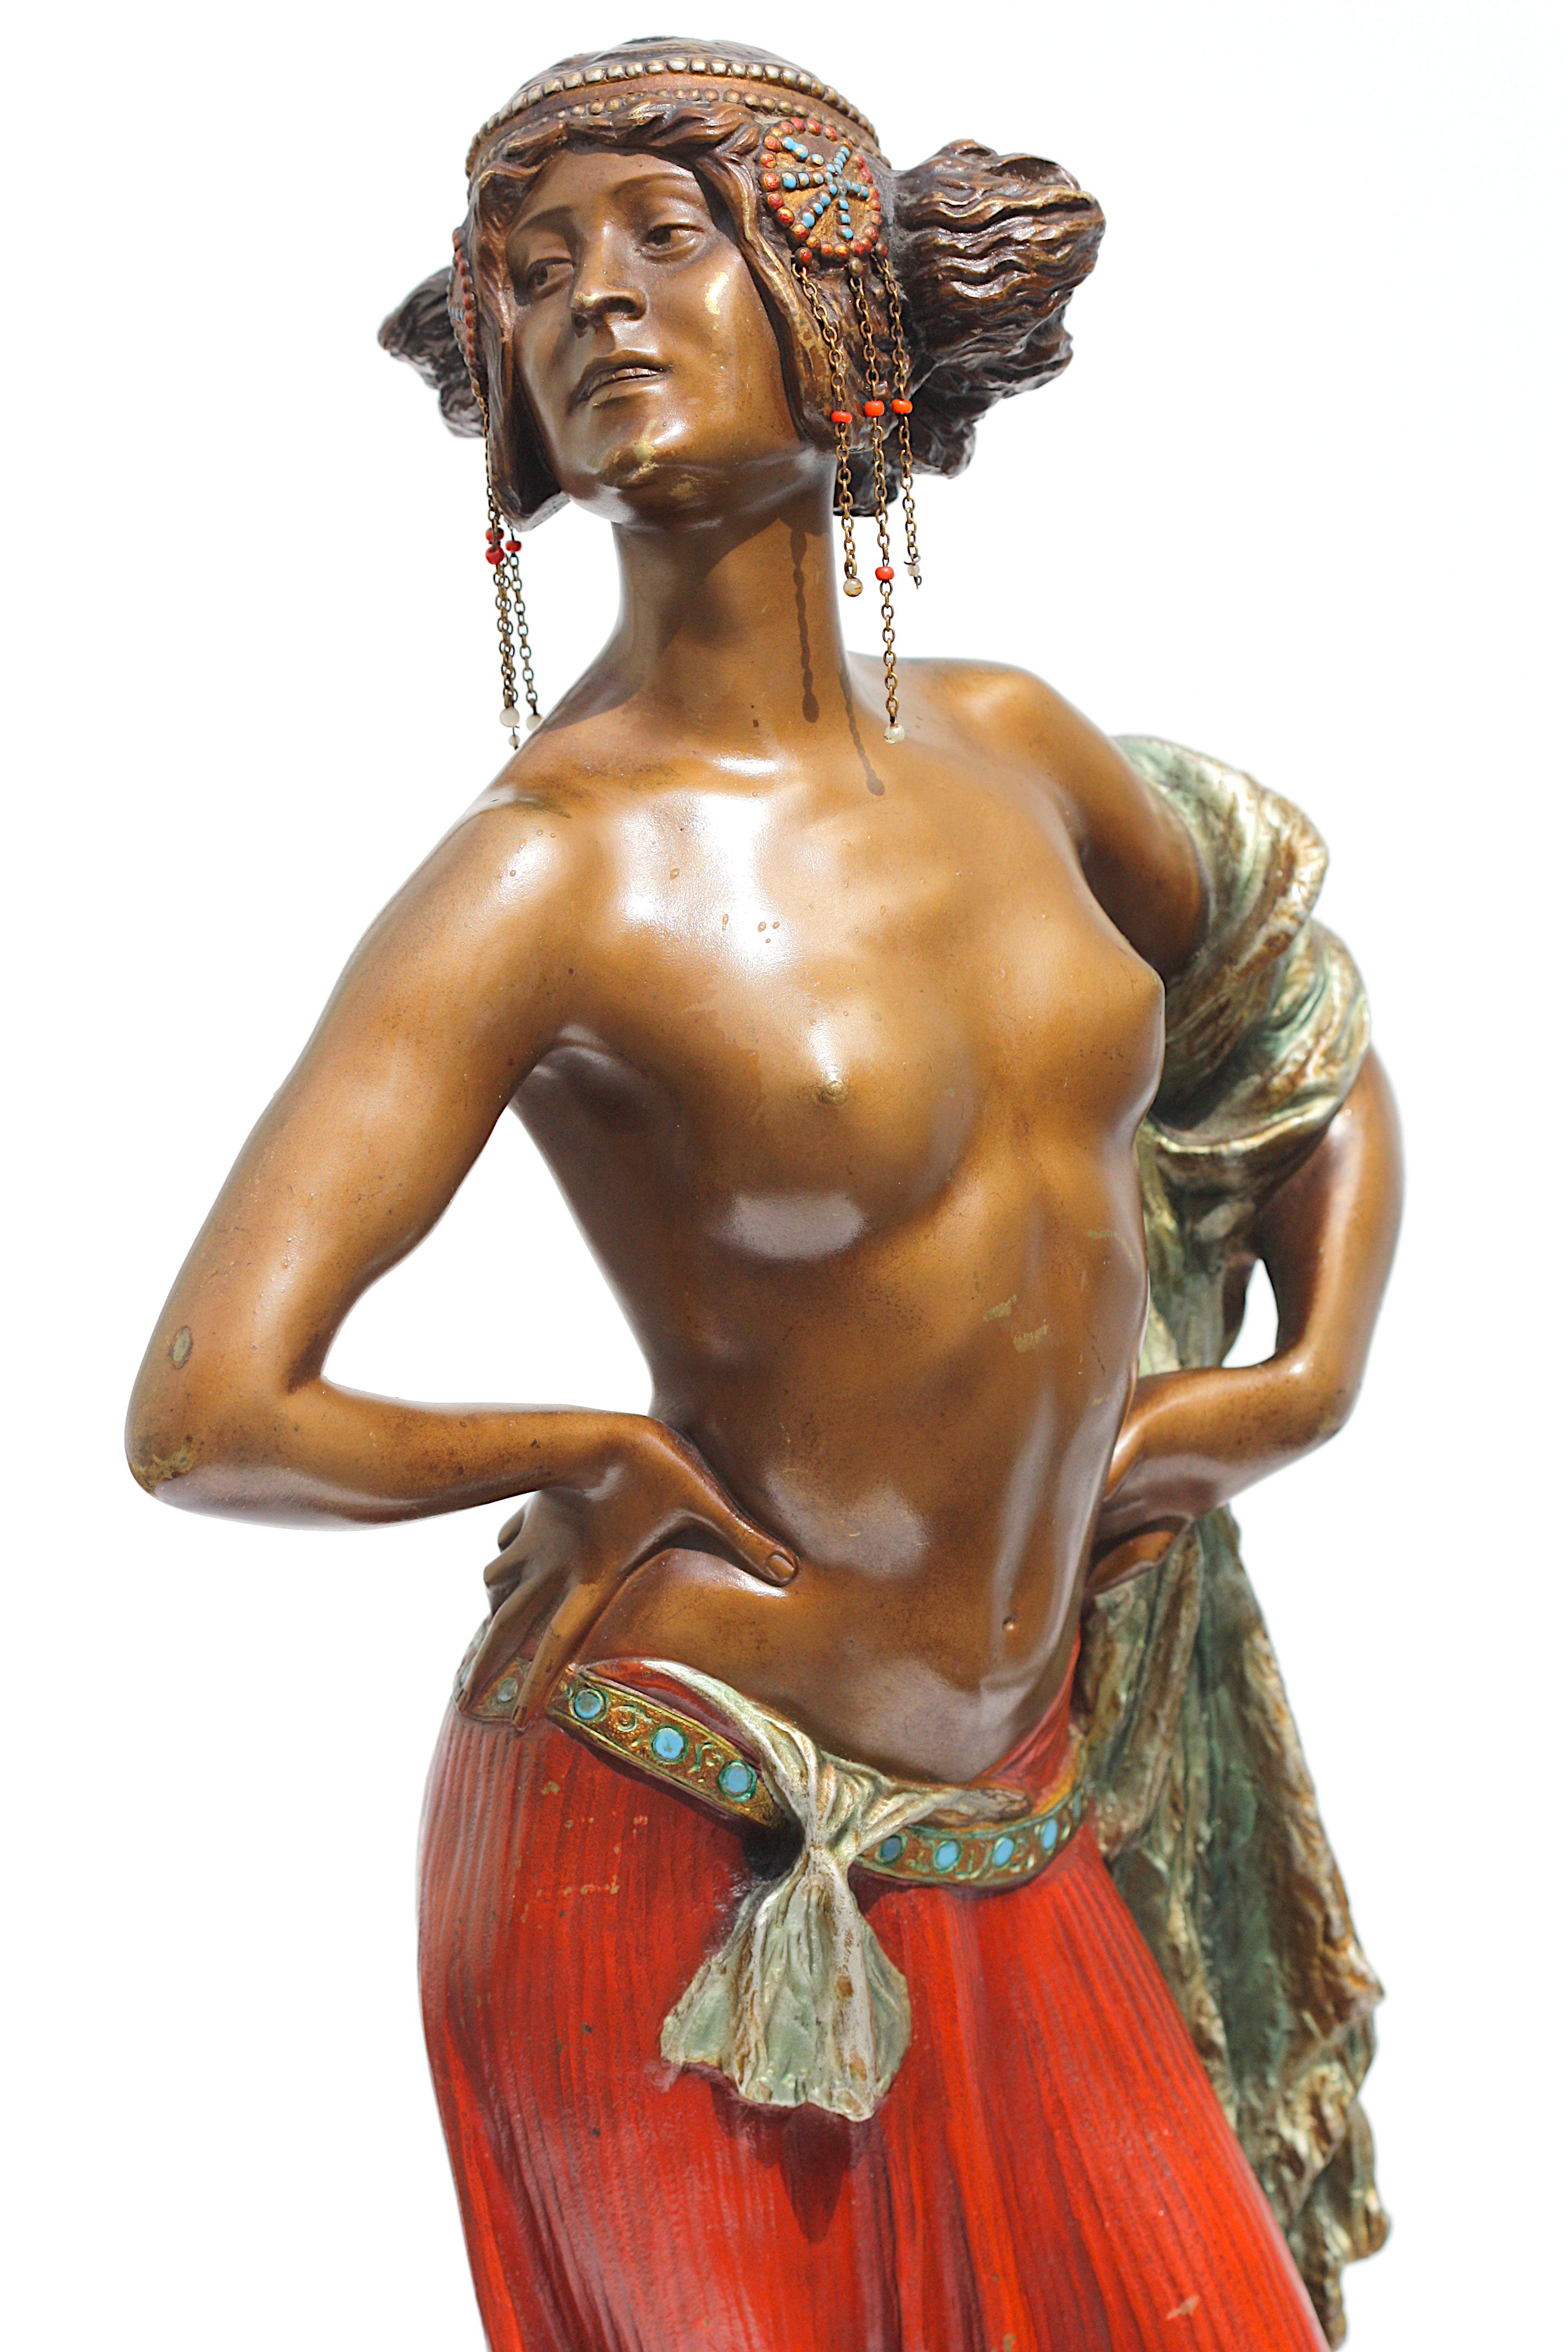 
Ernest Serger, (German/Austrian, 1840-1917) 
Bronze Salome, Circa 1890. Signed E. Seger. Poised proudly, her upper torso exposed, she holds a shawl and wears a red skirt, on a circular base, atop an onyx plinth.
Height 21 in. (53.34 cm.), Width